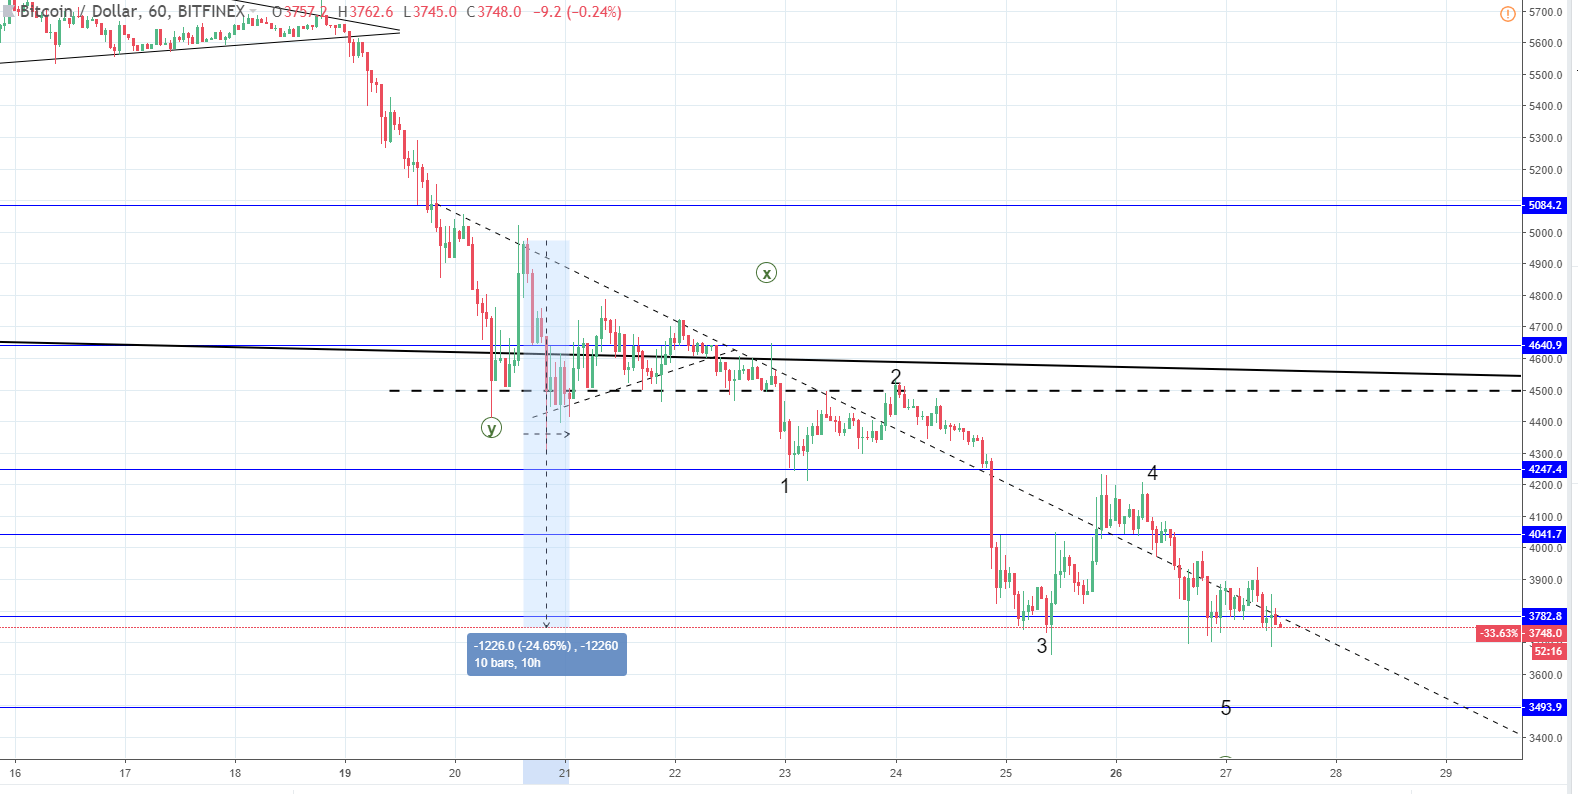 BTC/USD and XRP/USD still bearish but a recovery is on the way